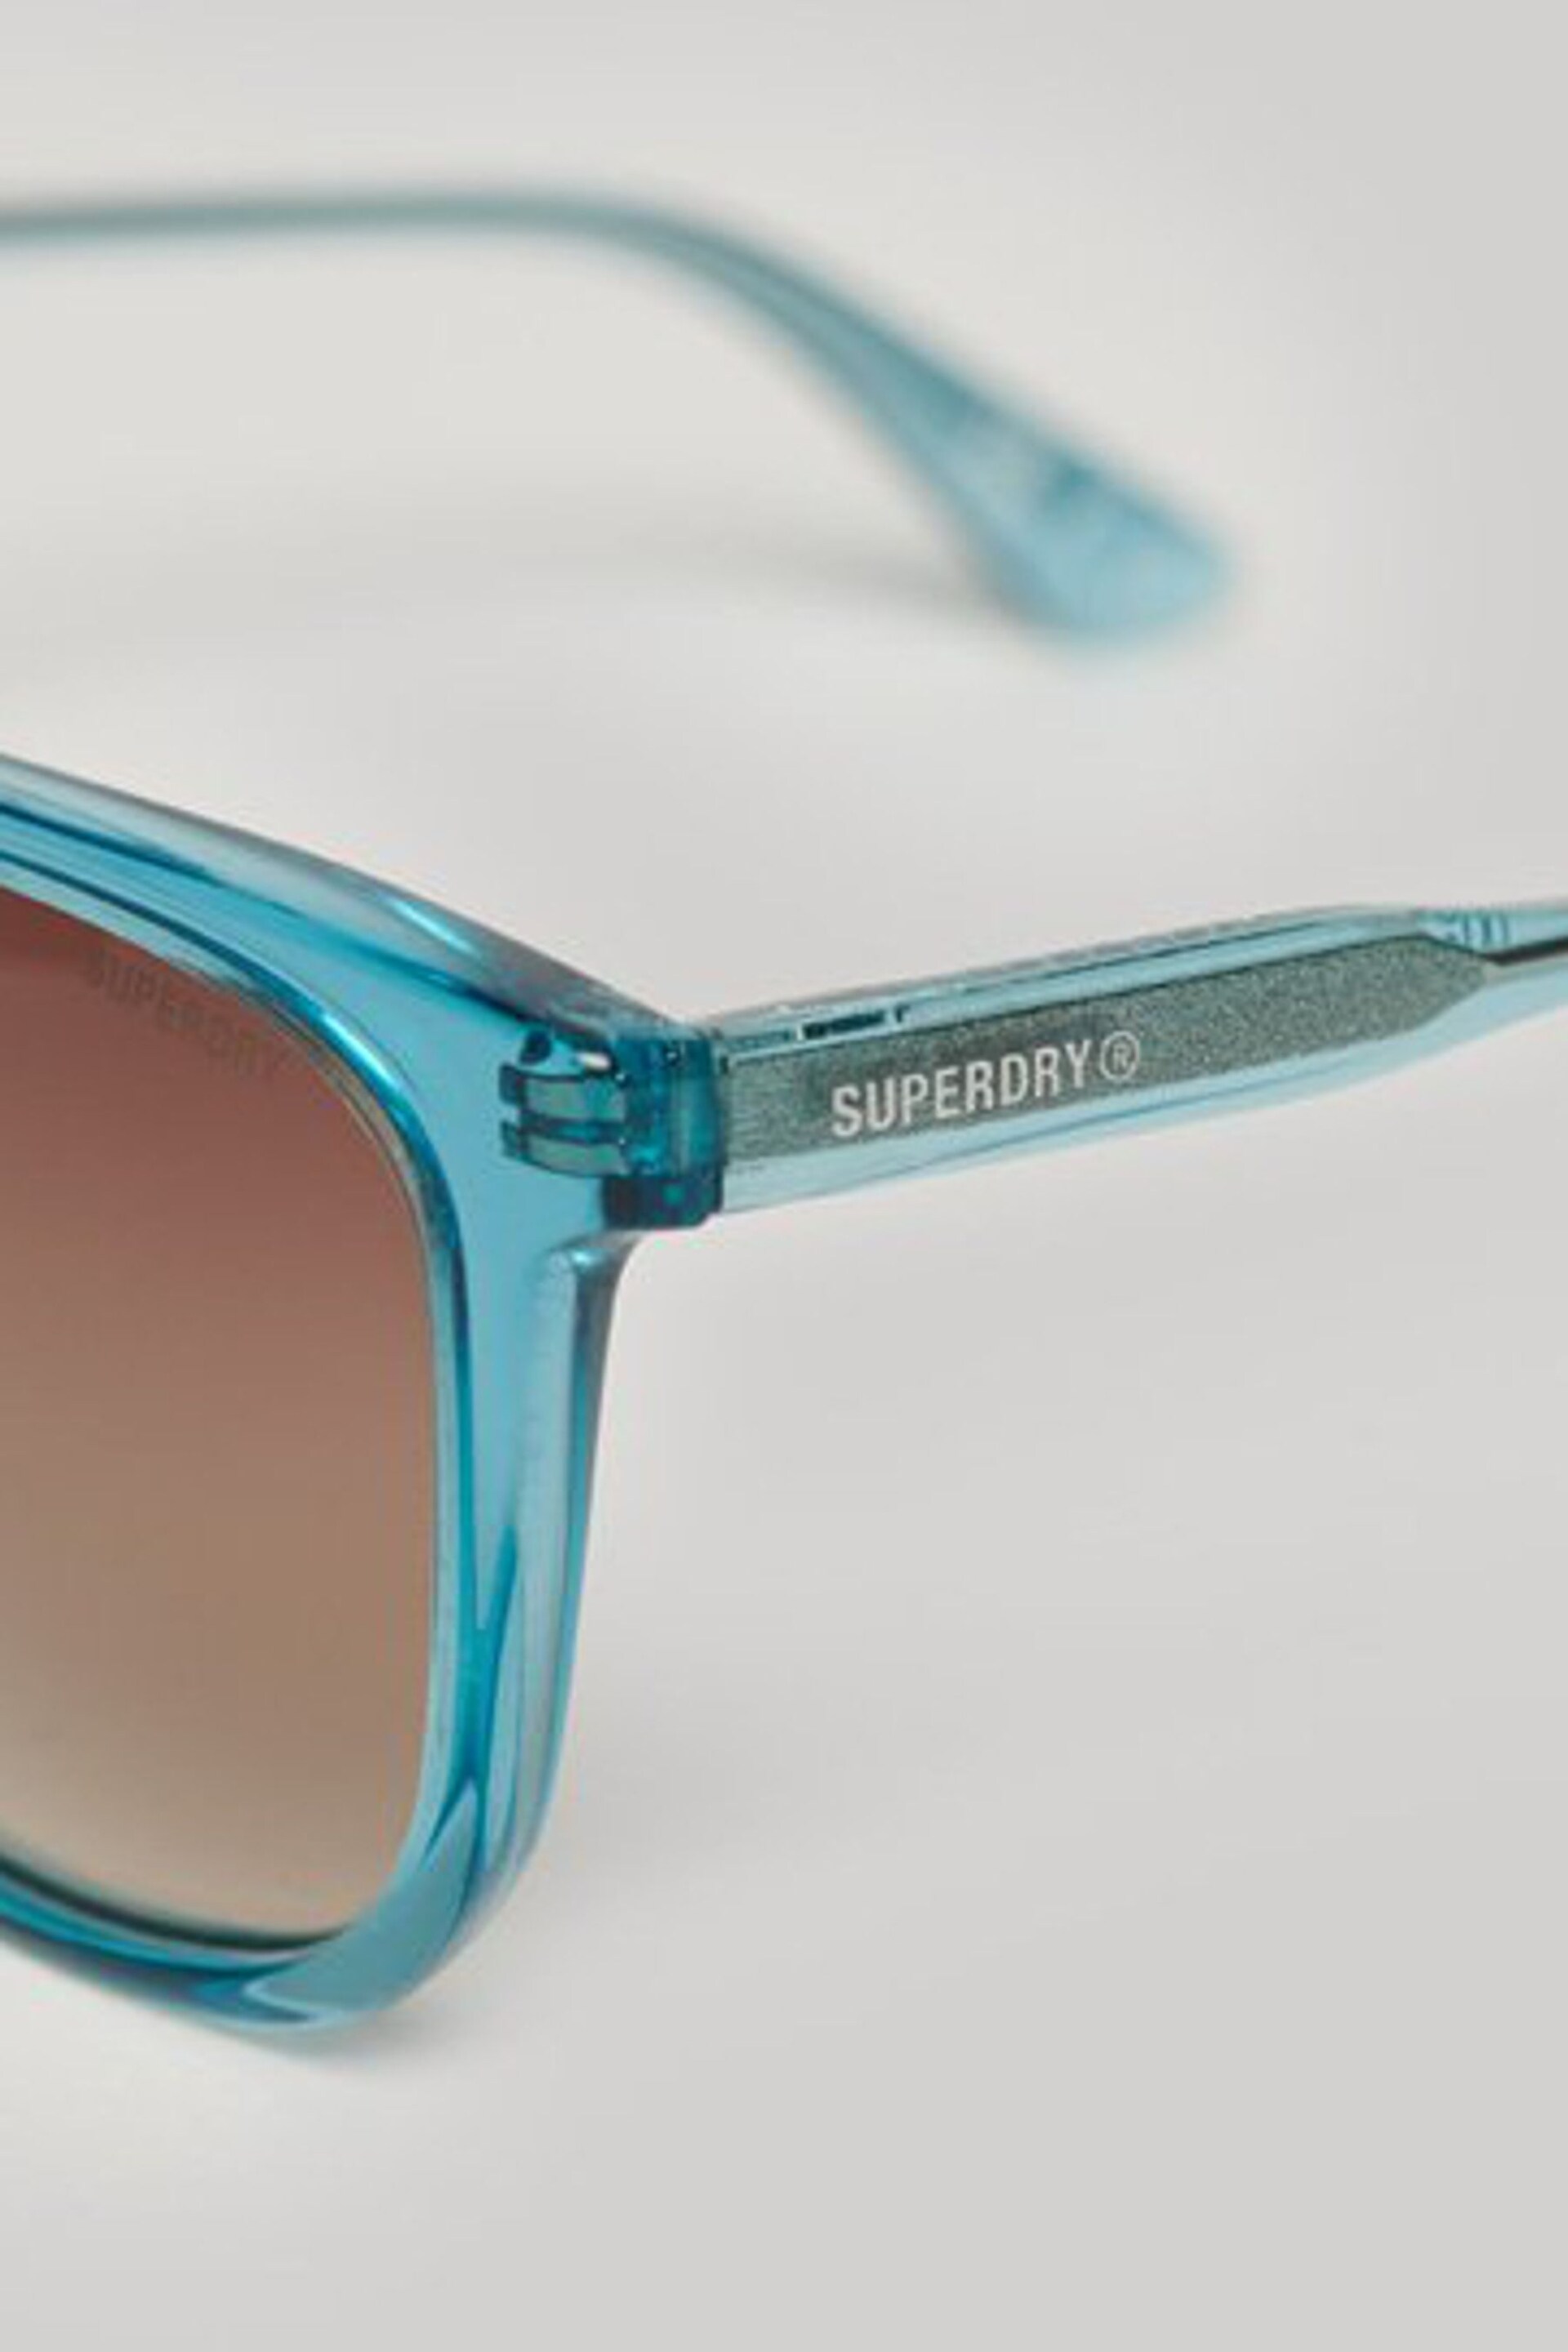 Superdry Blue SDR Sorcha Sunglasses - Image 3 of 4